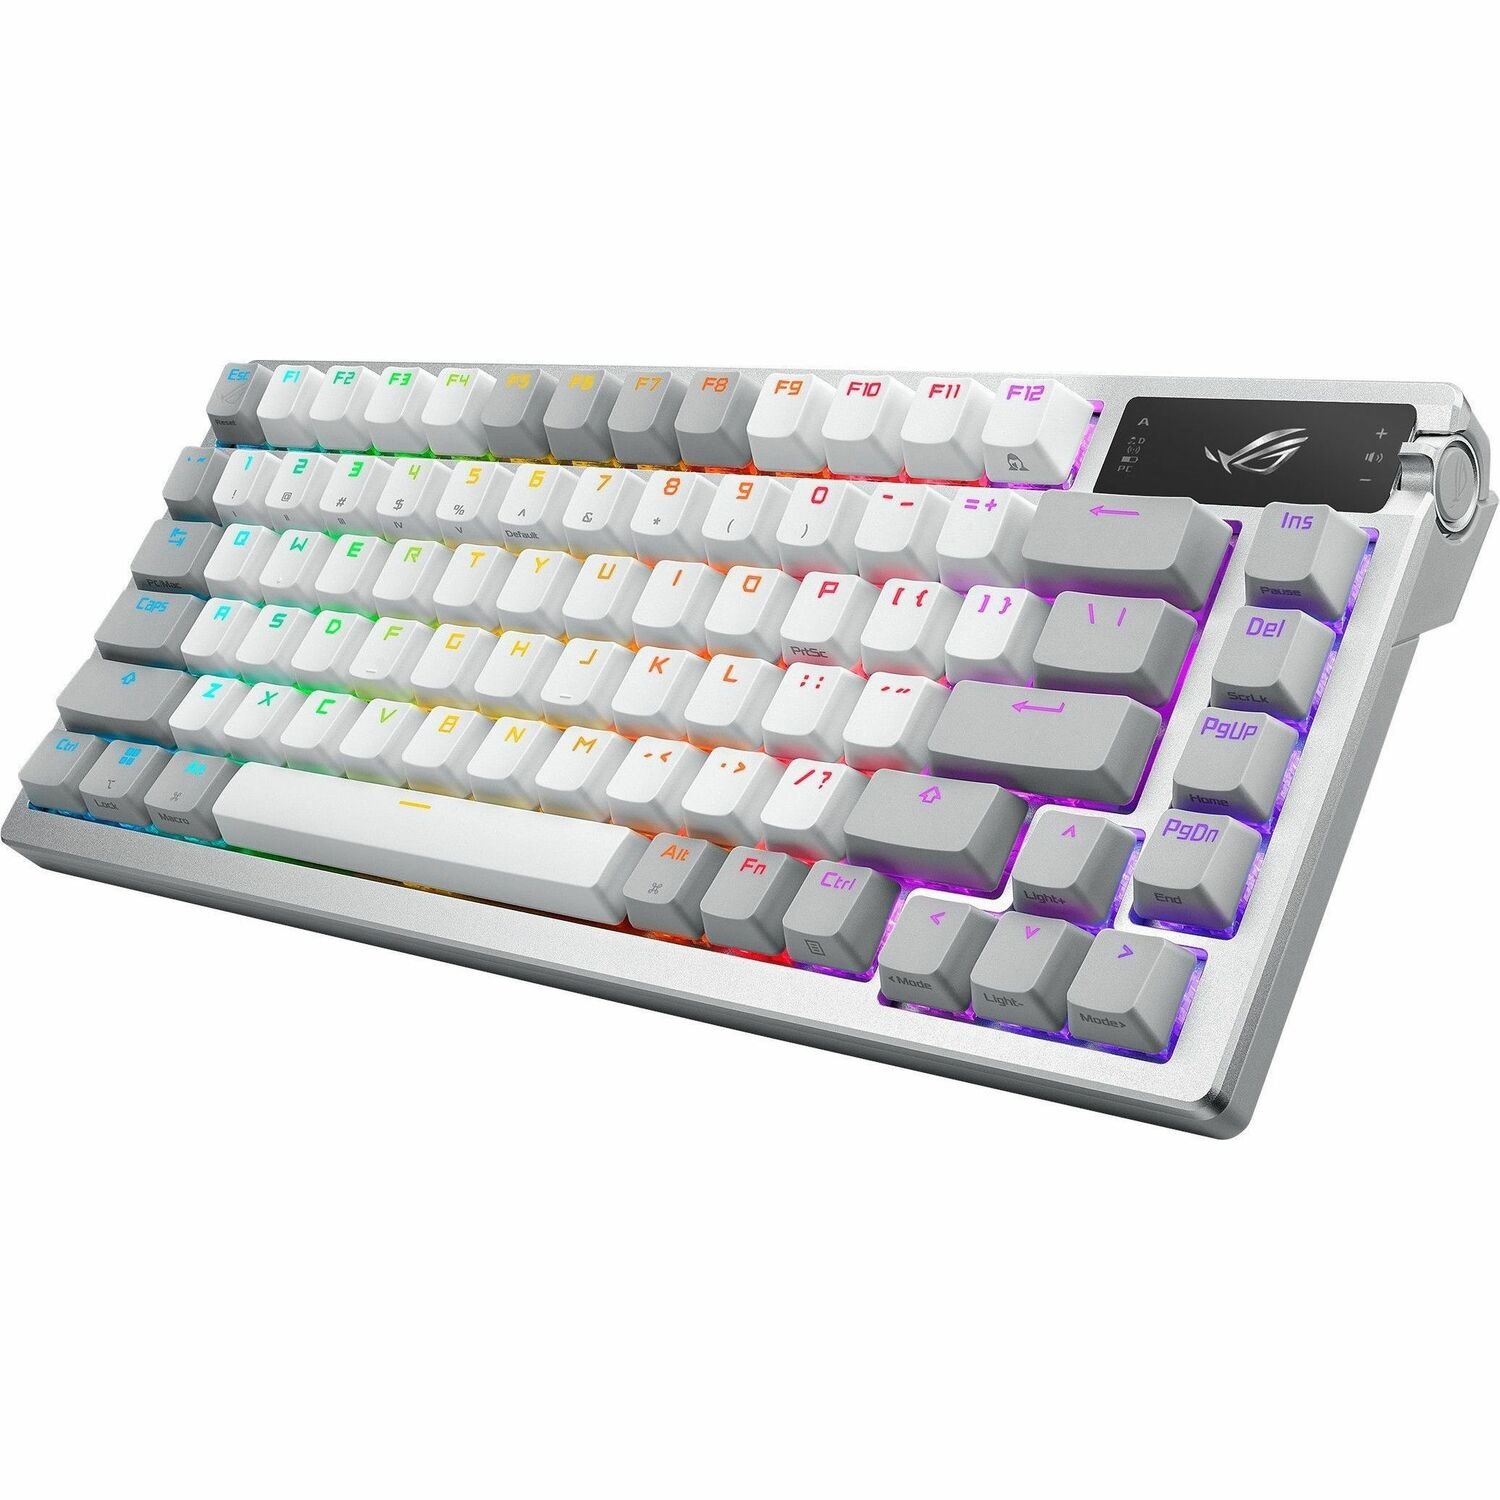 Asus ROG Azoth Gaming Keyboard - Wired/Wireless Connectivity - USB 2.0 Interface - RGB LED - White